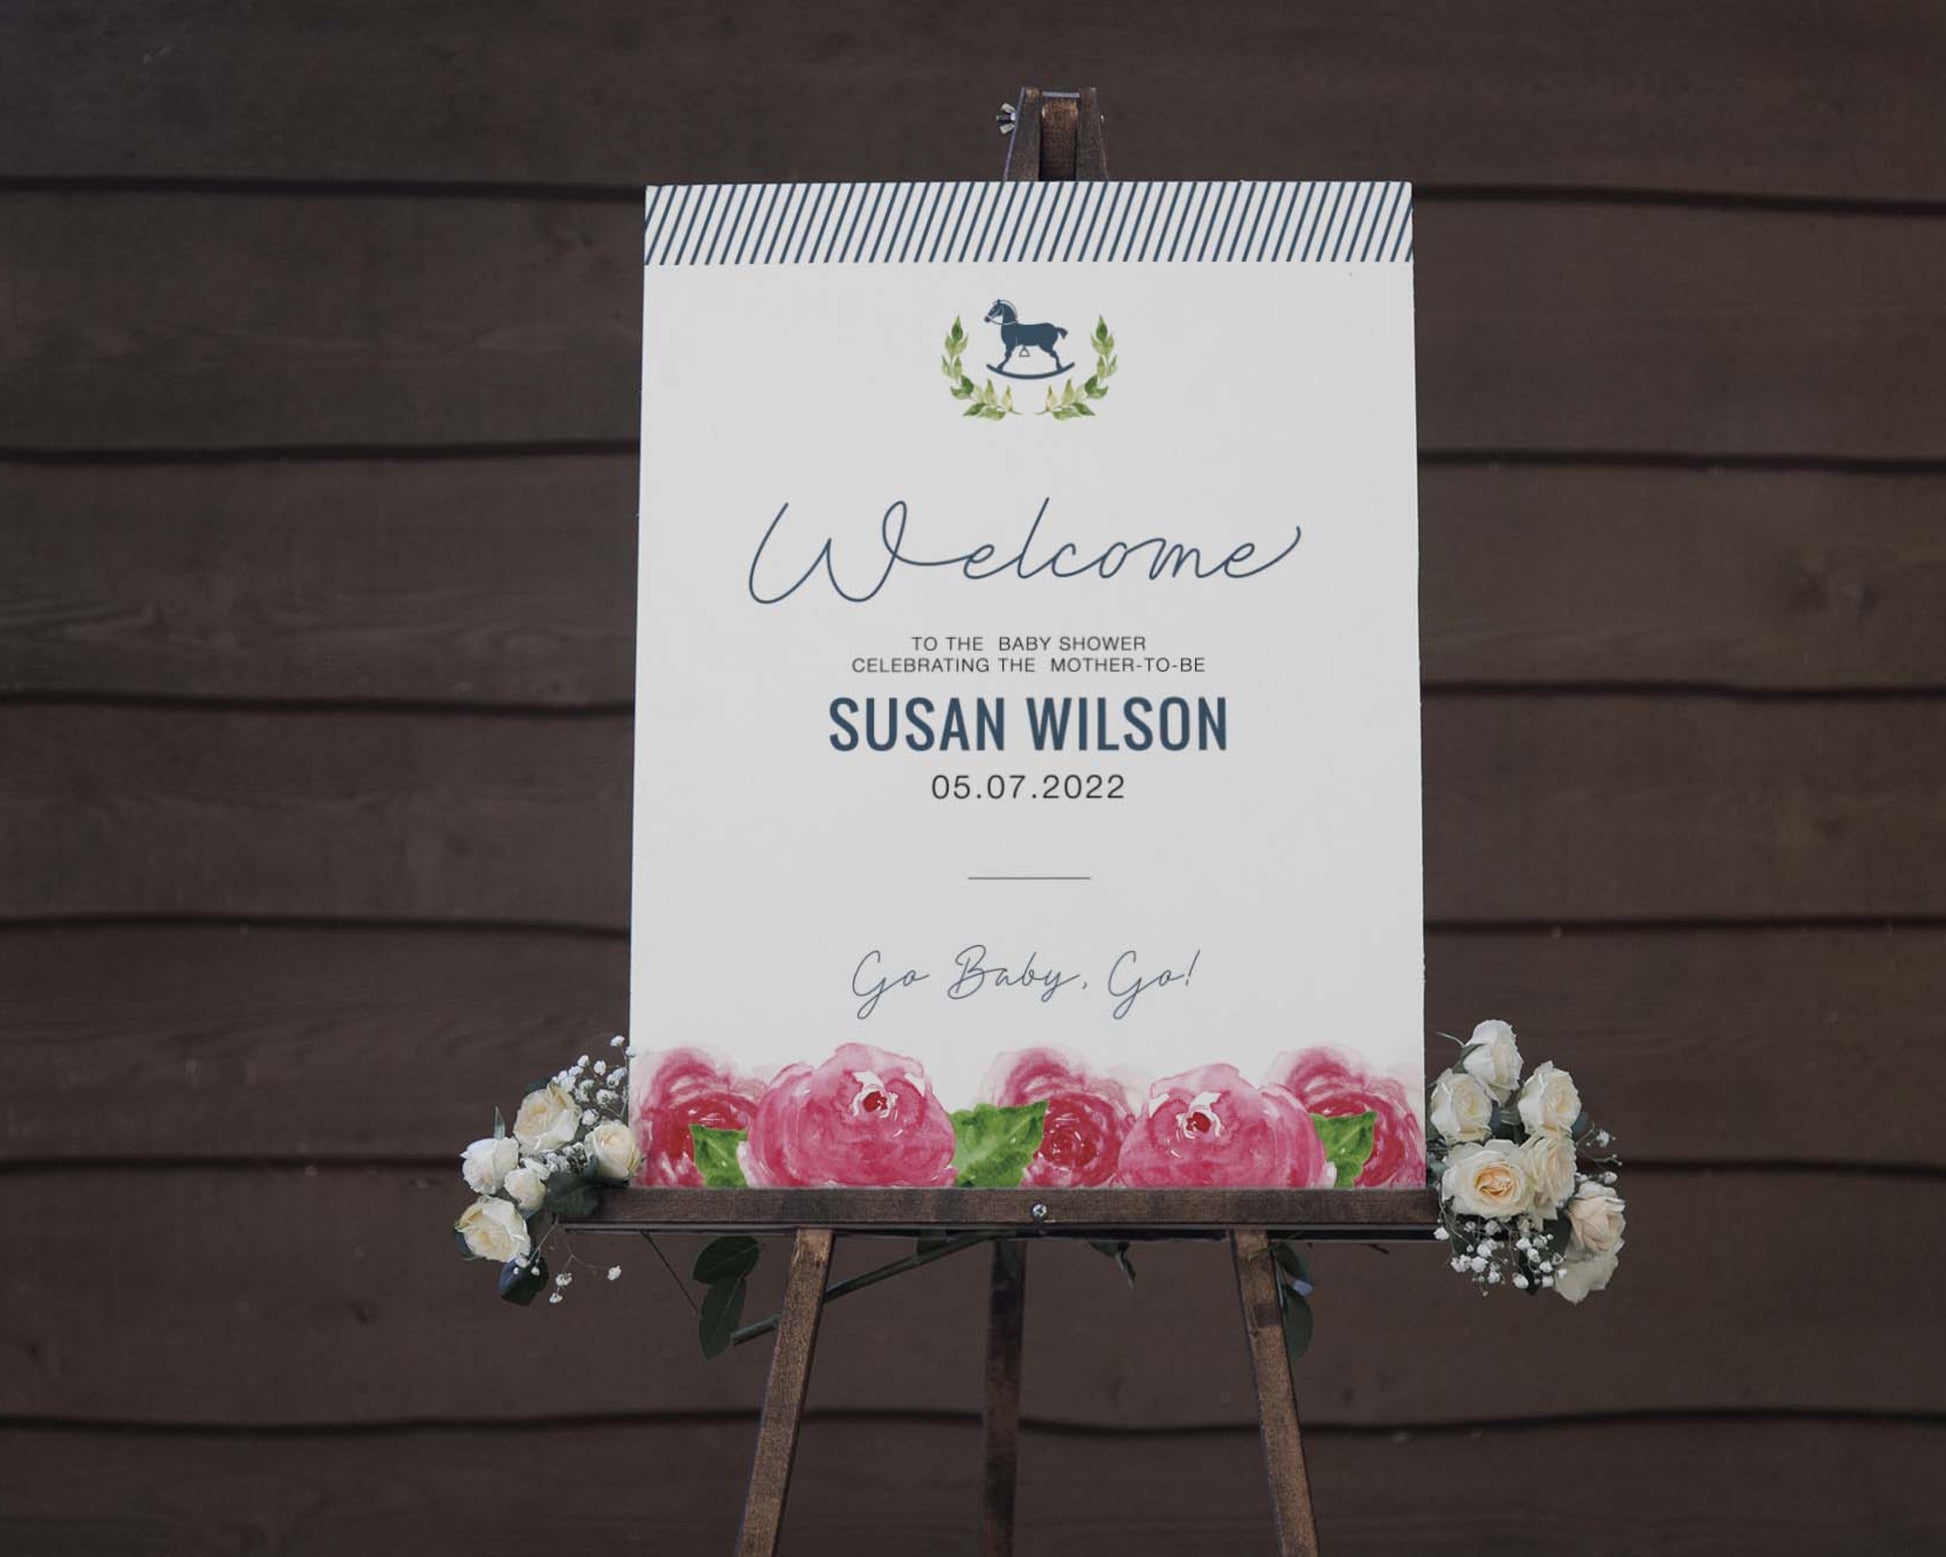 Kentucky Derby Baby Shower Welcome with pink roses and rocking horse design